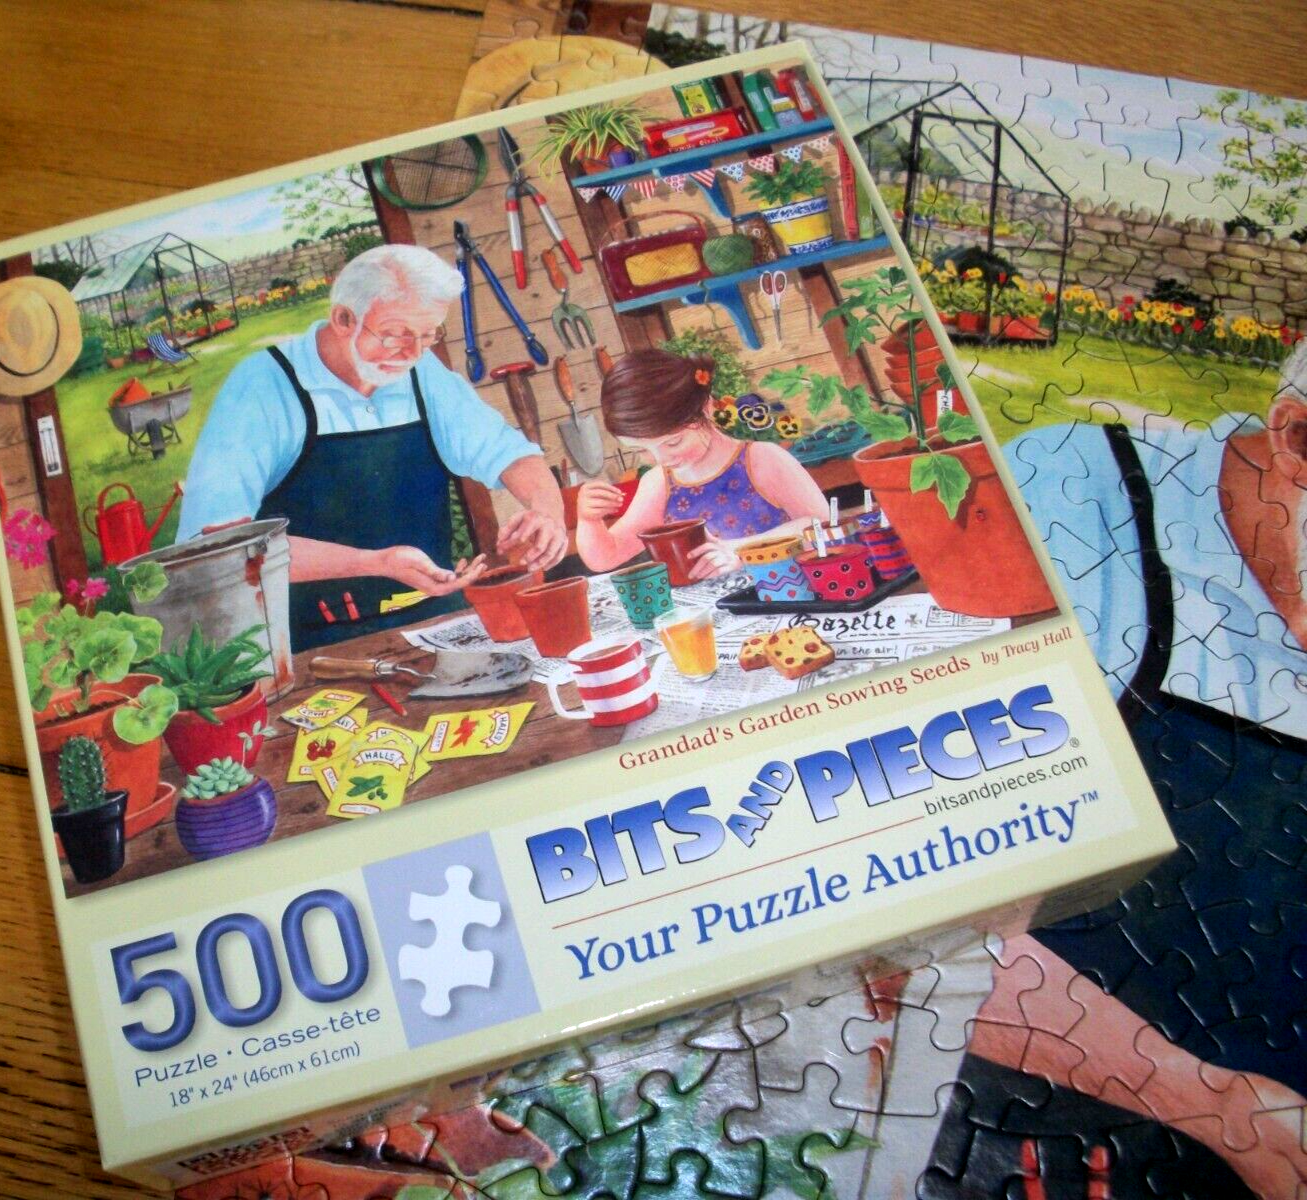 Primary image for Jigsaw Puzzle 500 Pcs Grandads Garden Sowing Seeds With Granddaughter Complete